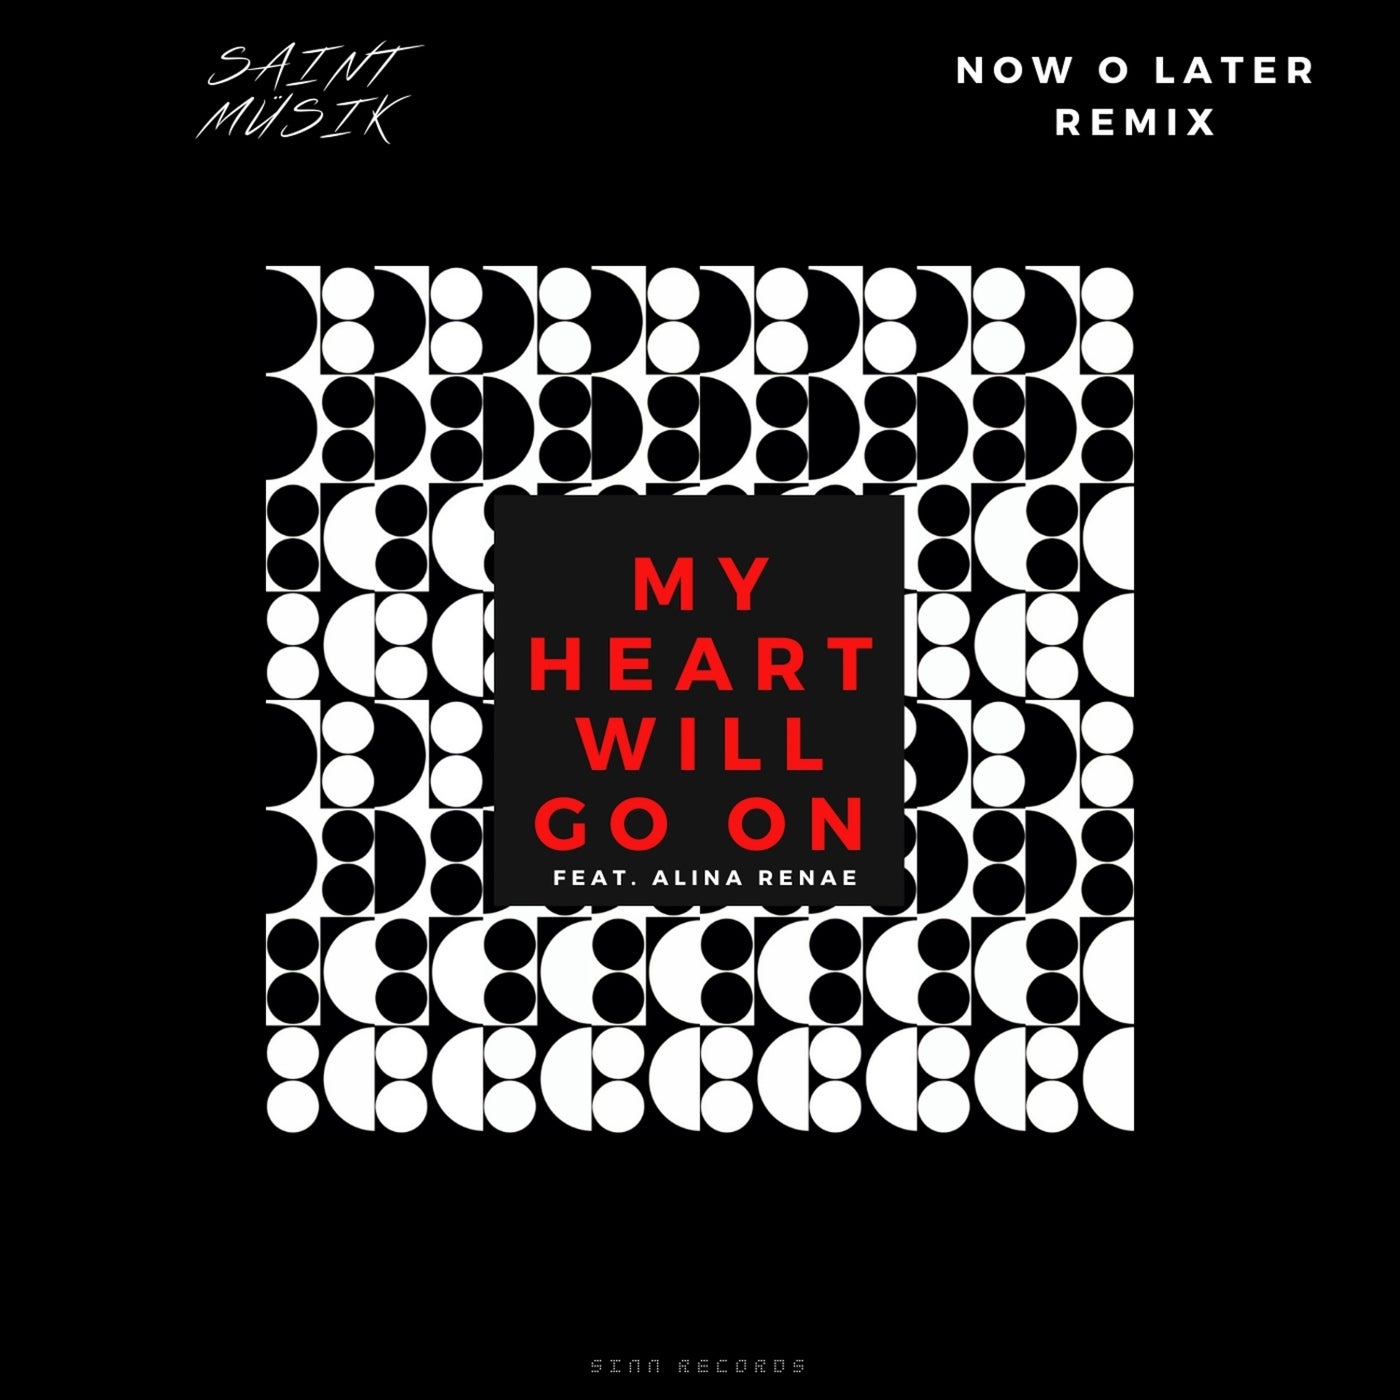 Now O Later music download - Beatport